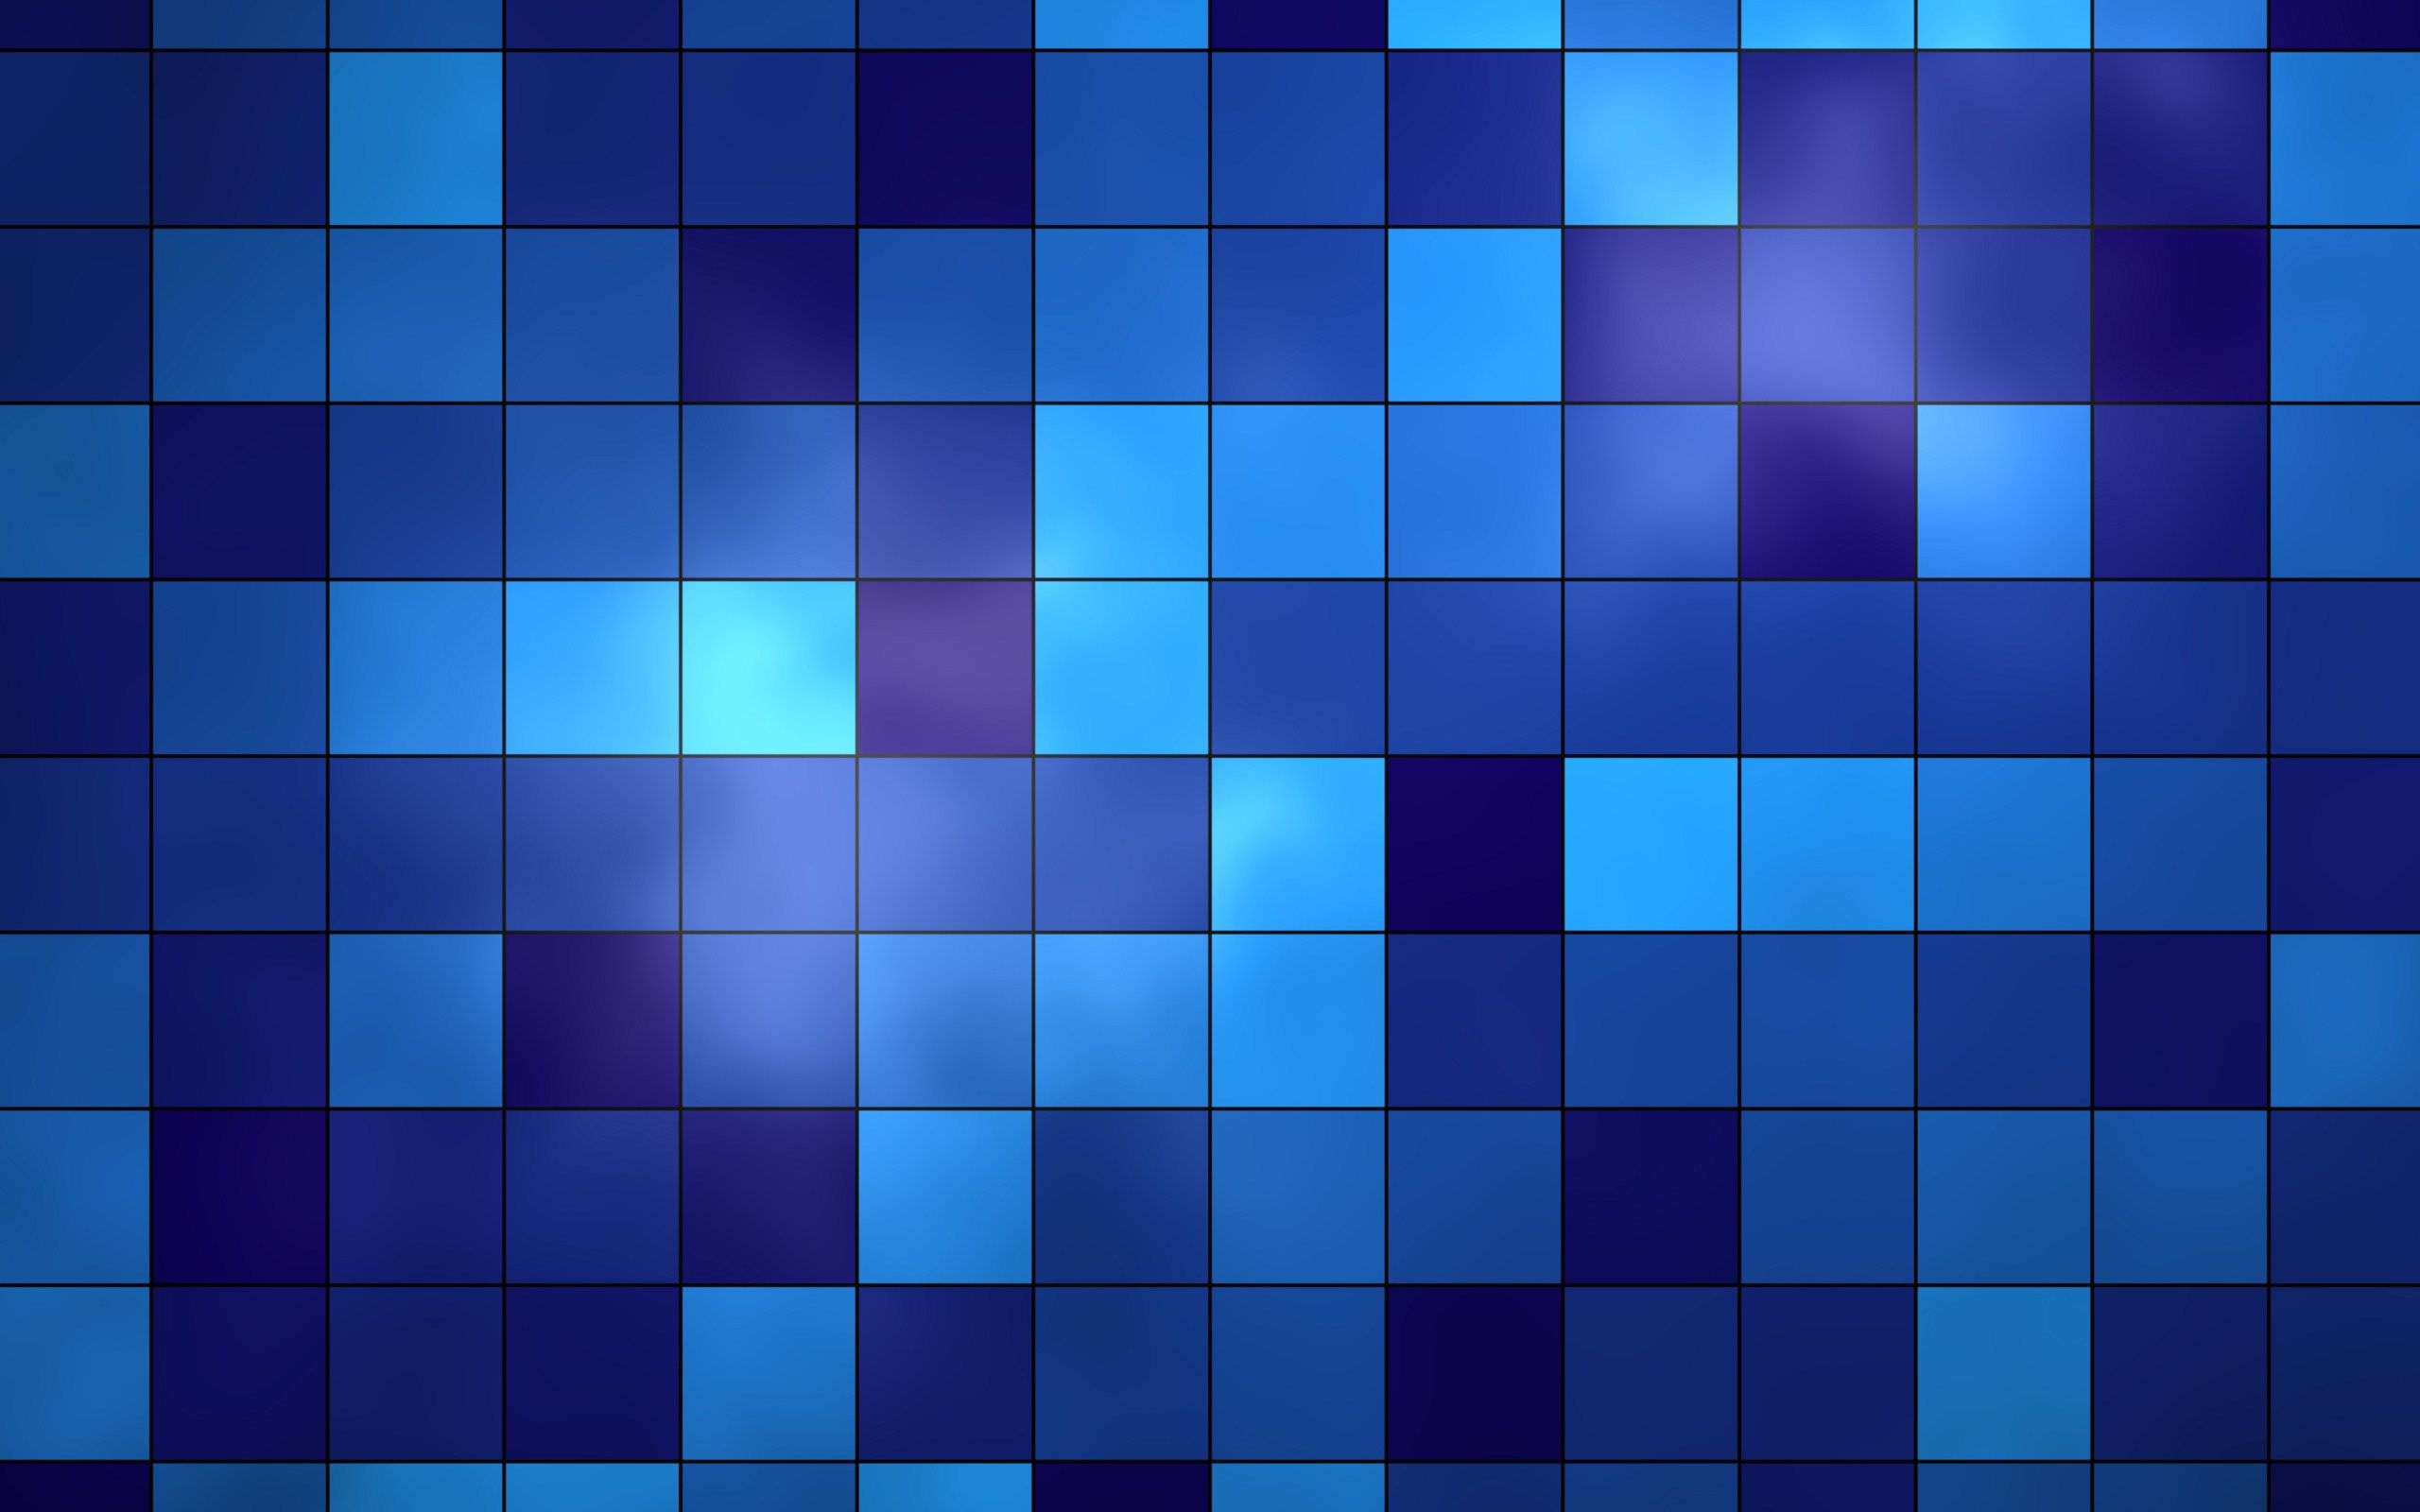 5 Mosaic HD Wallpapers Backgrounds - Wallpaper Abyss